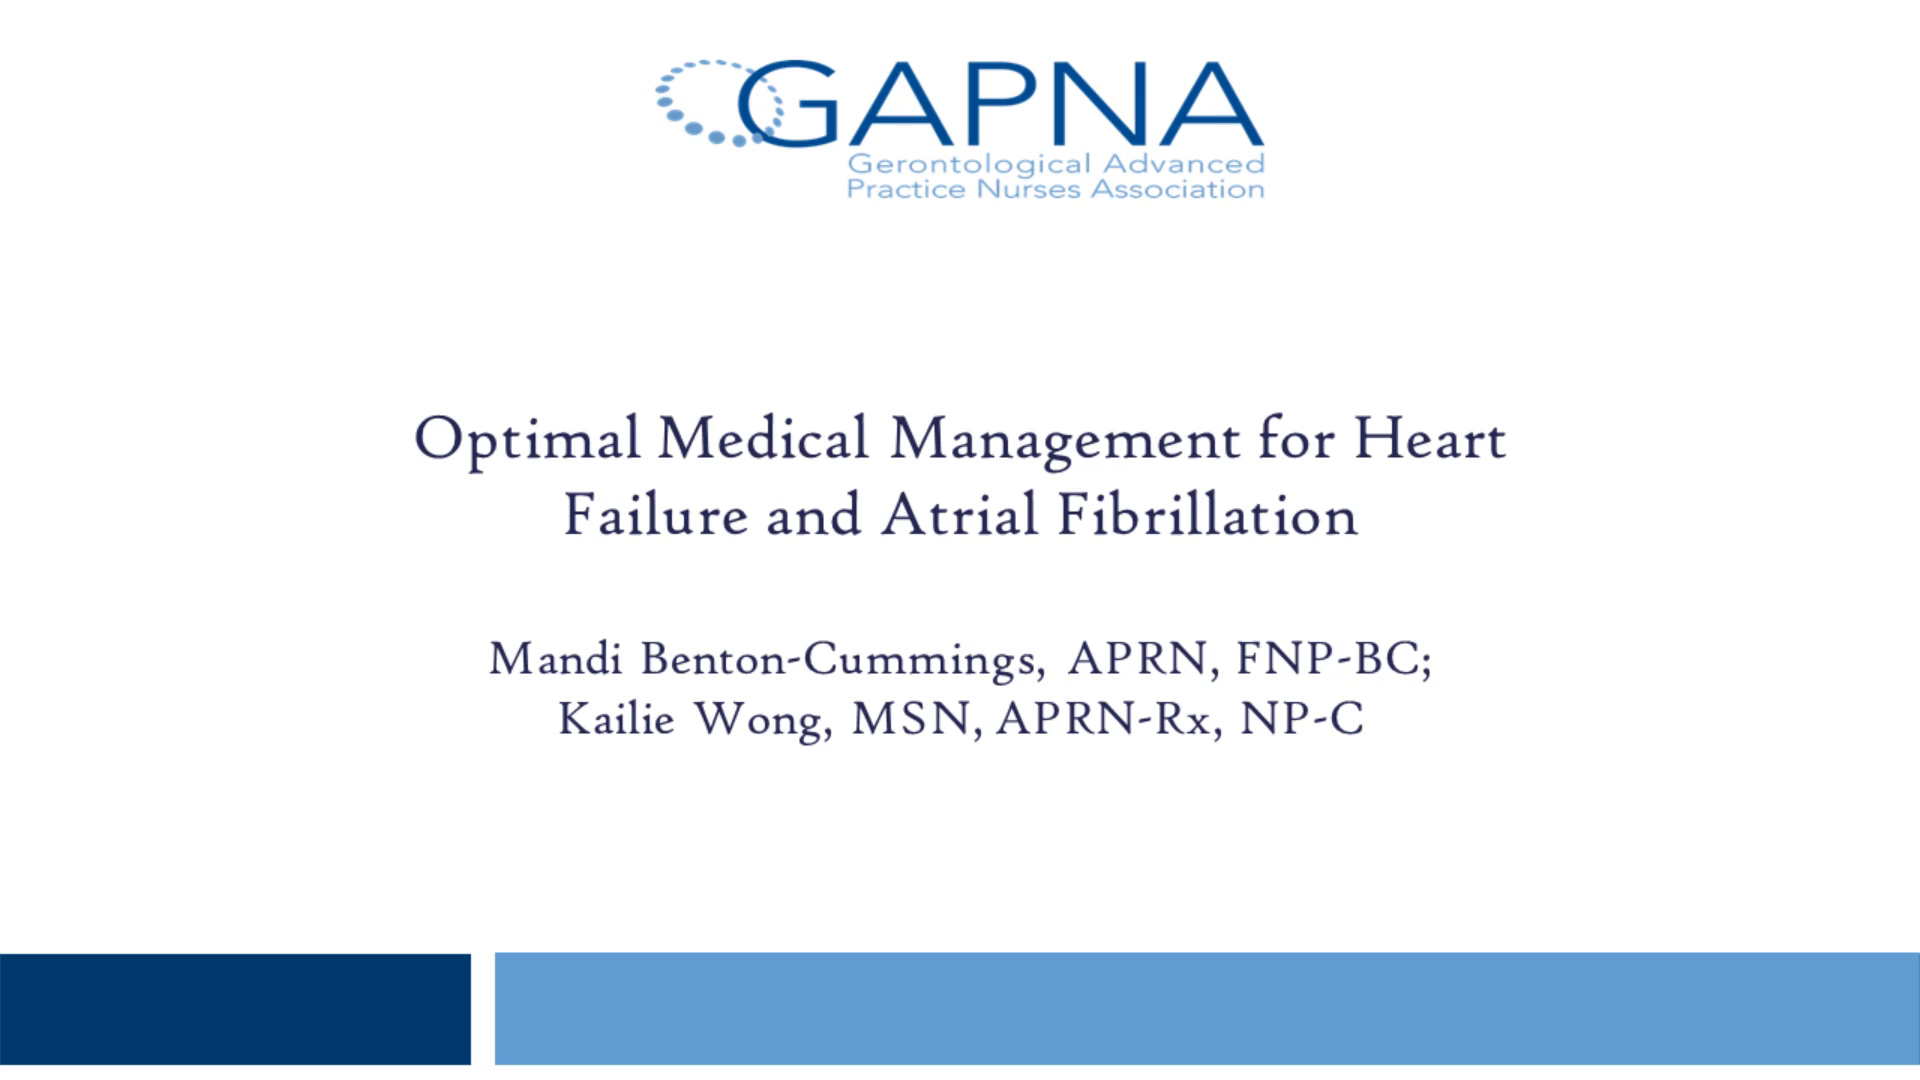 Optimal Medical Management for Heart Failure and Atrial Fibrillation